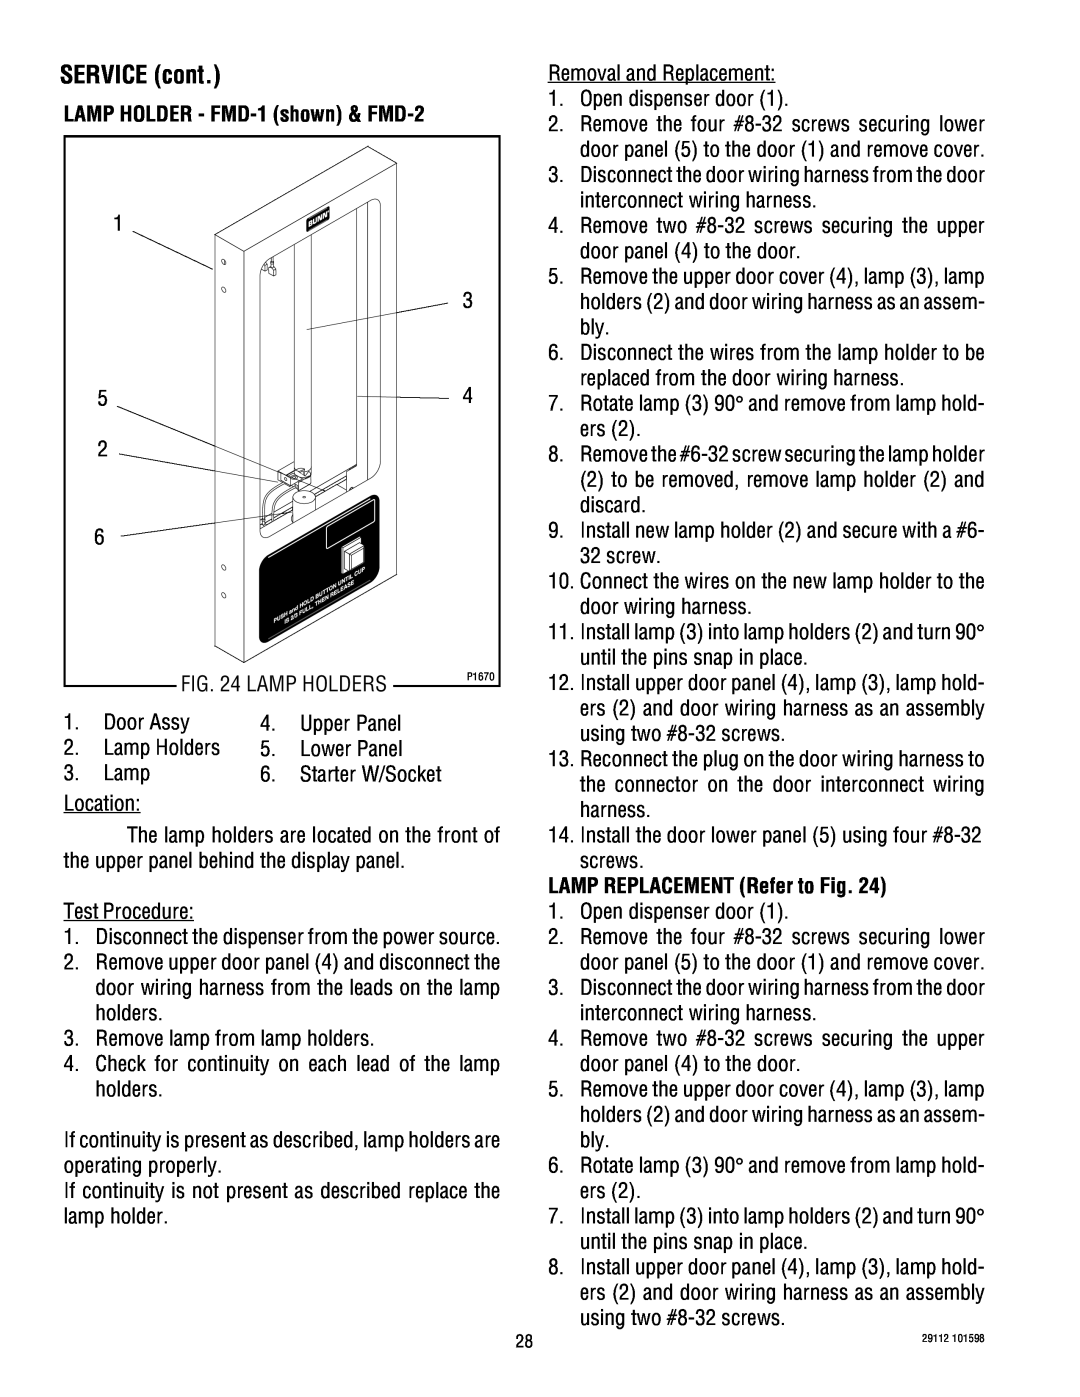 Bunn FMD-1, FMD-2 service manual LAMP REPLACEMENT Refer to Fig, SERVICE cont 